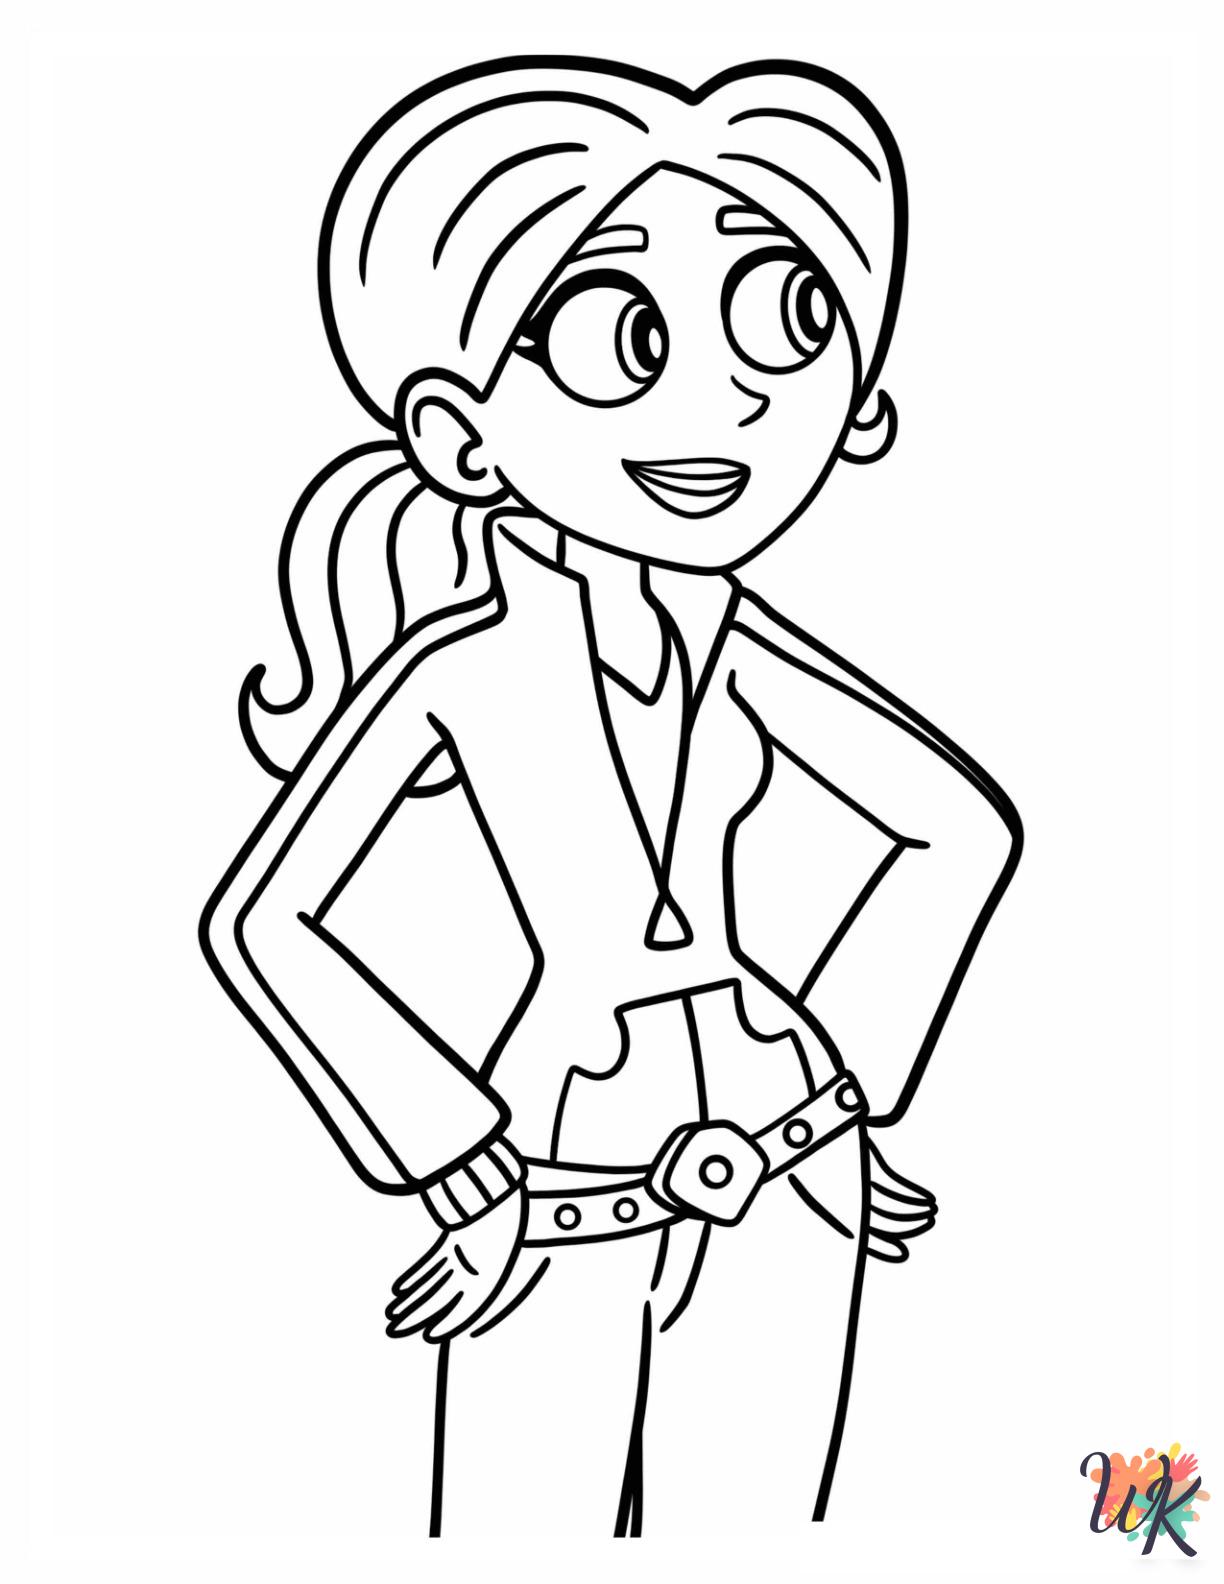 Wild Kratts coloring pages for adults pdf